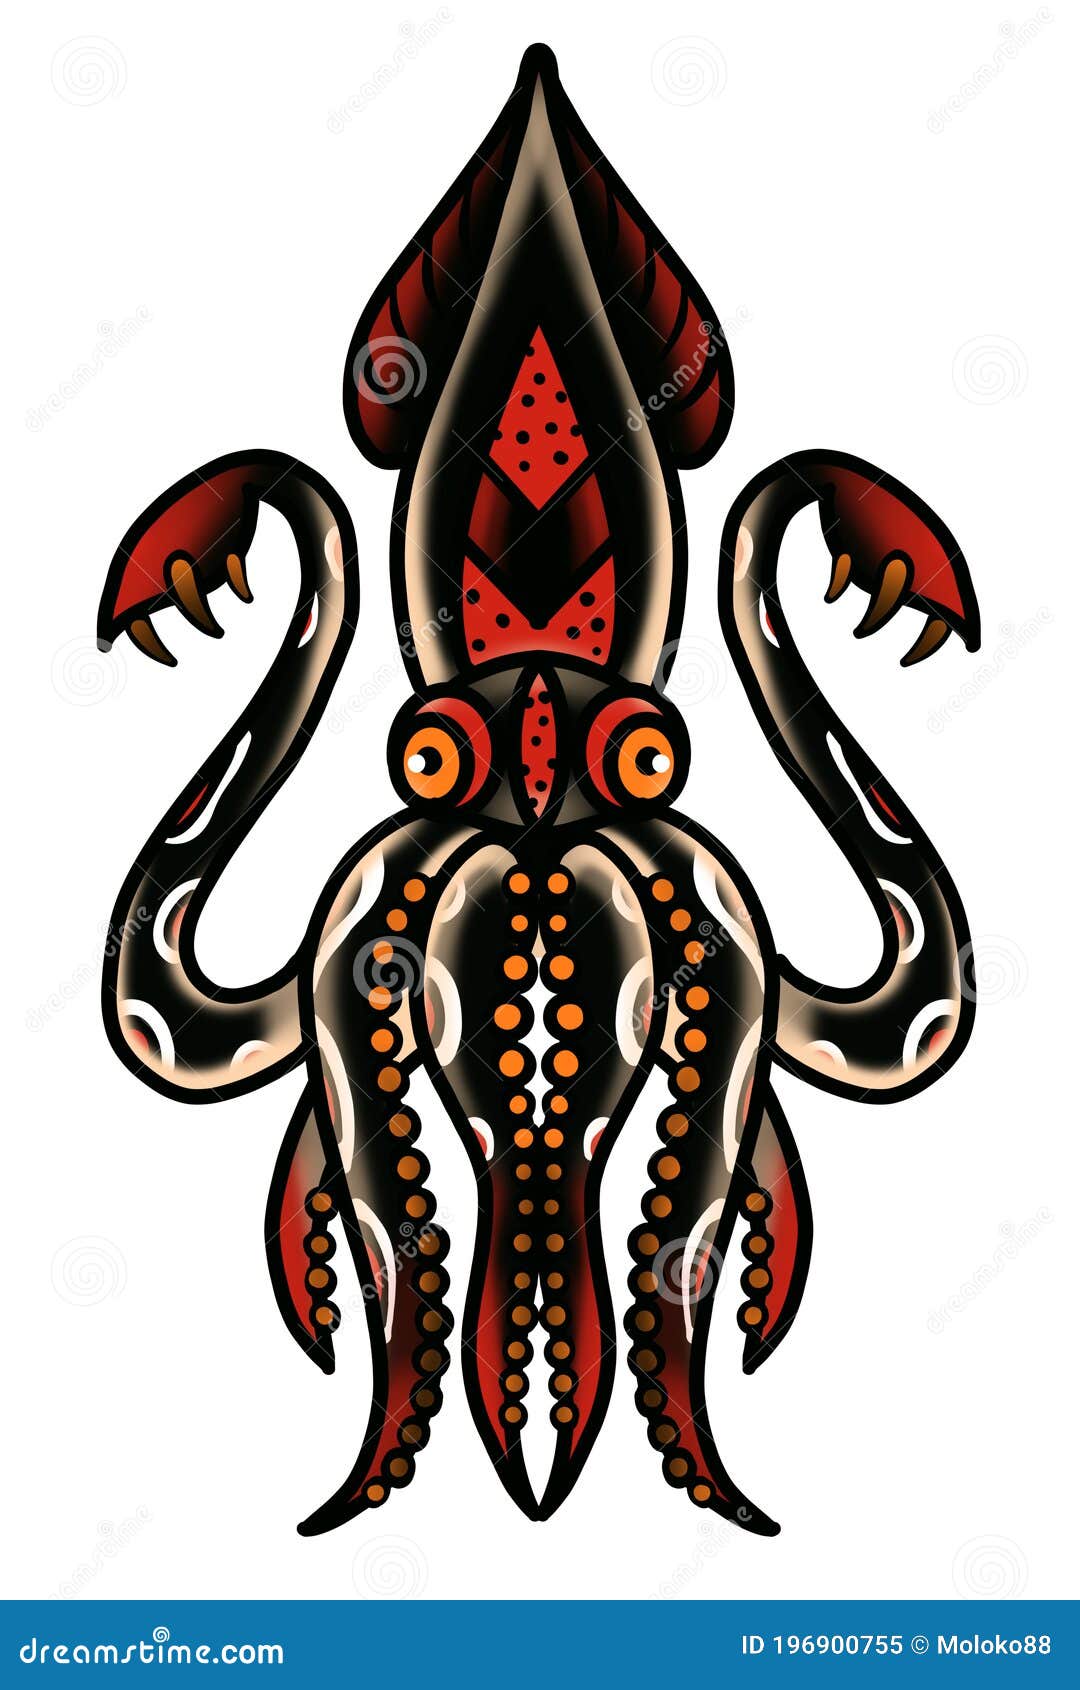 100 Squid Tattoo Designs For Men  Manly Tentacled Skin Art  Squid tattoo  Woodcut tattoo Octopus tattoo sleeve